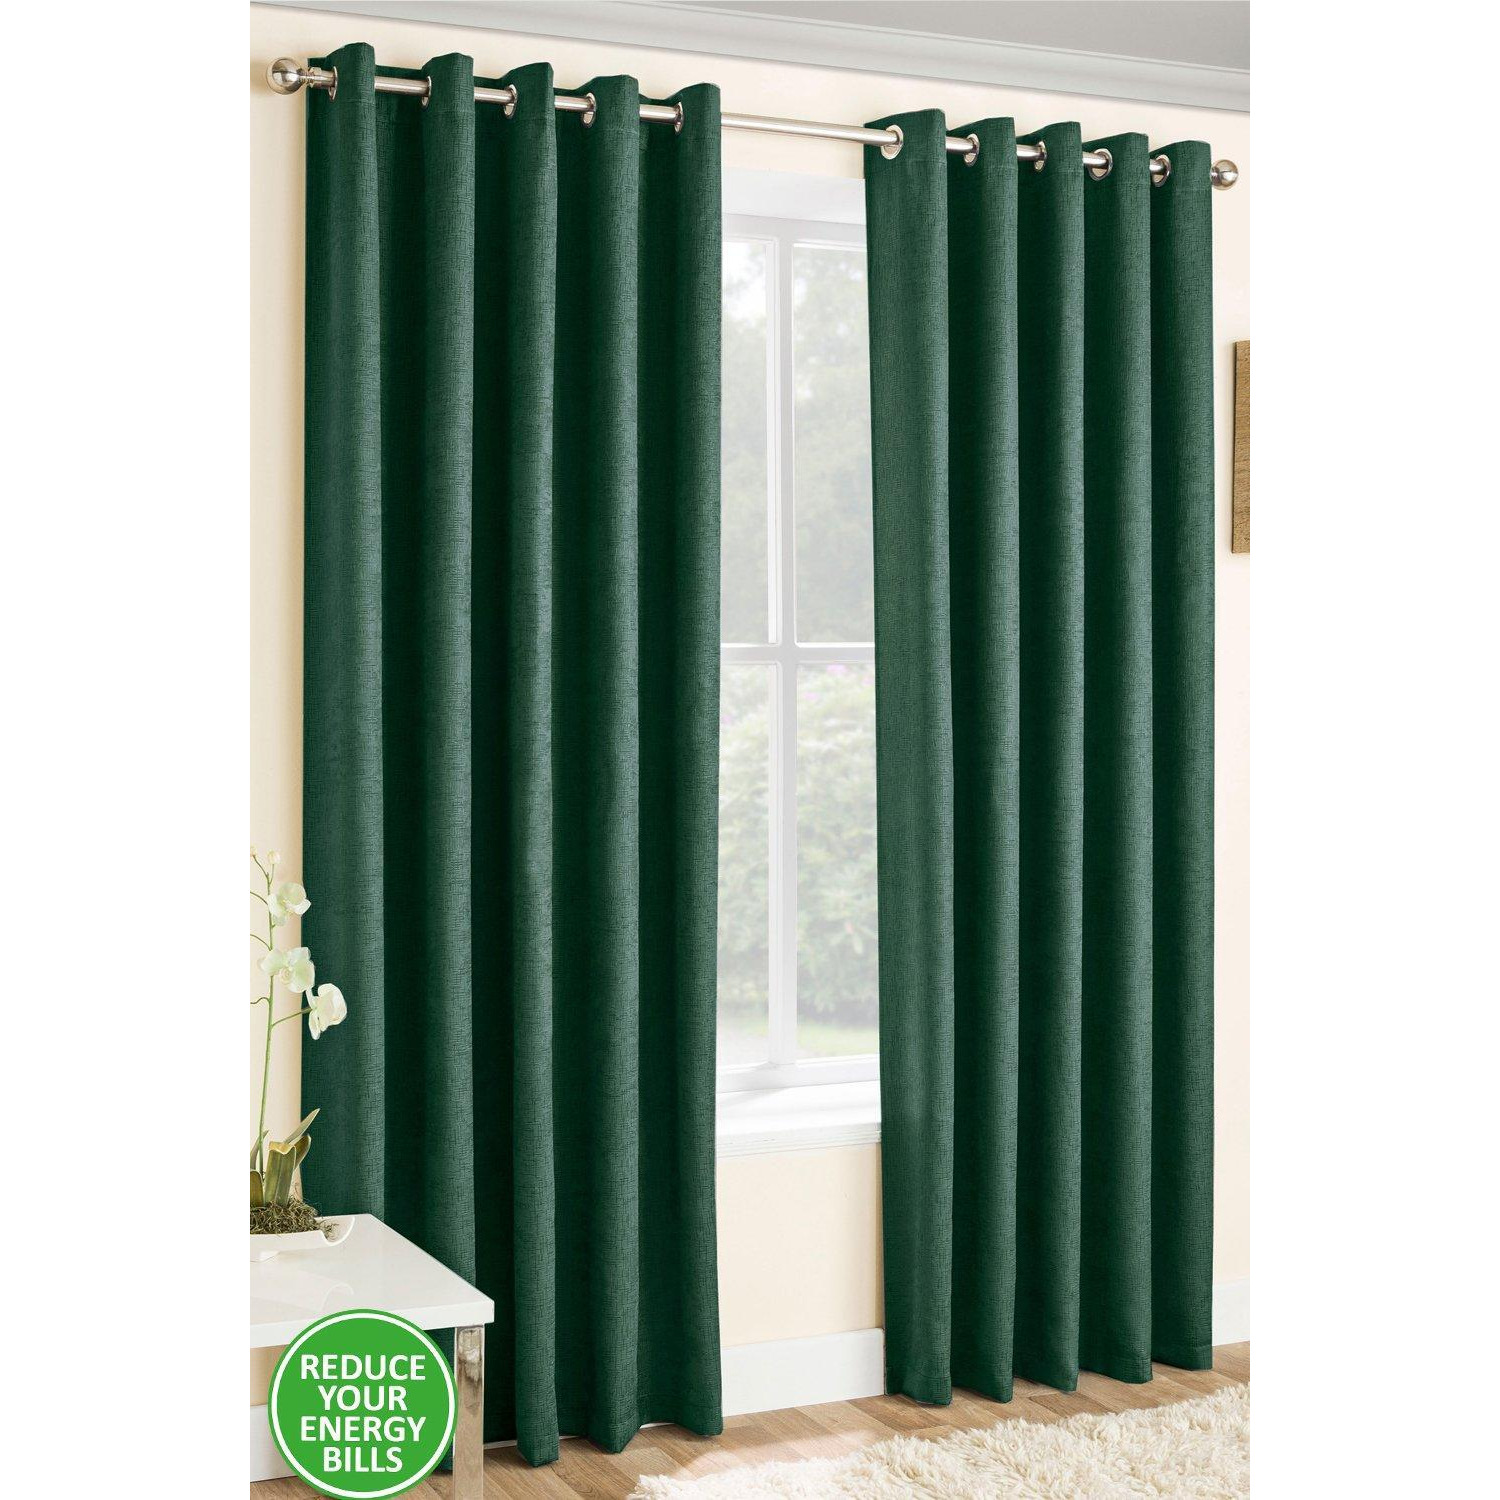 Pair of Eyelet Thermal Noise reducing Dim Out Curtains - image 1